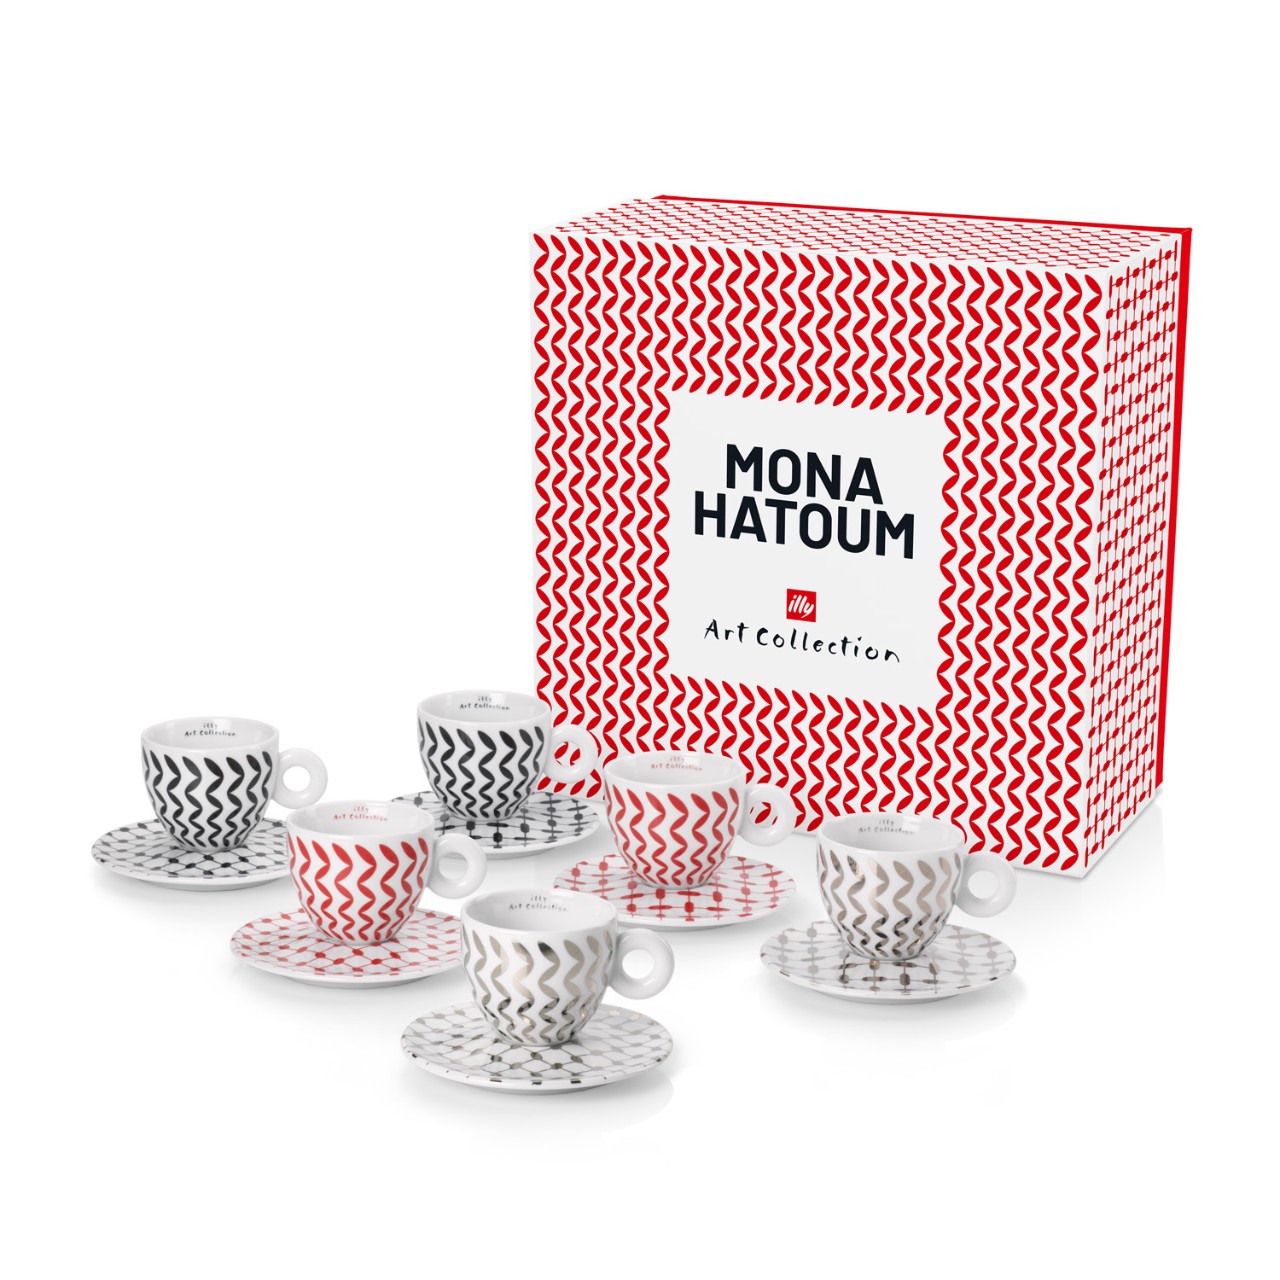 illy Art Collection Mona Hatoum - Set of 6 Cappuccino Cups